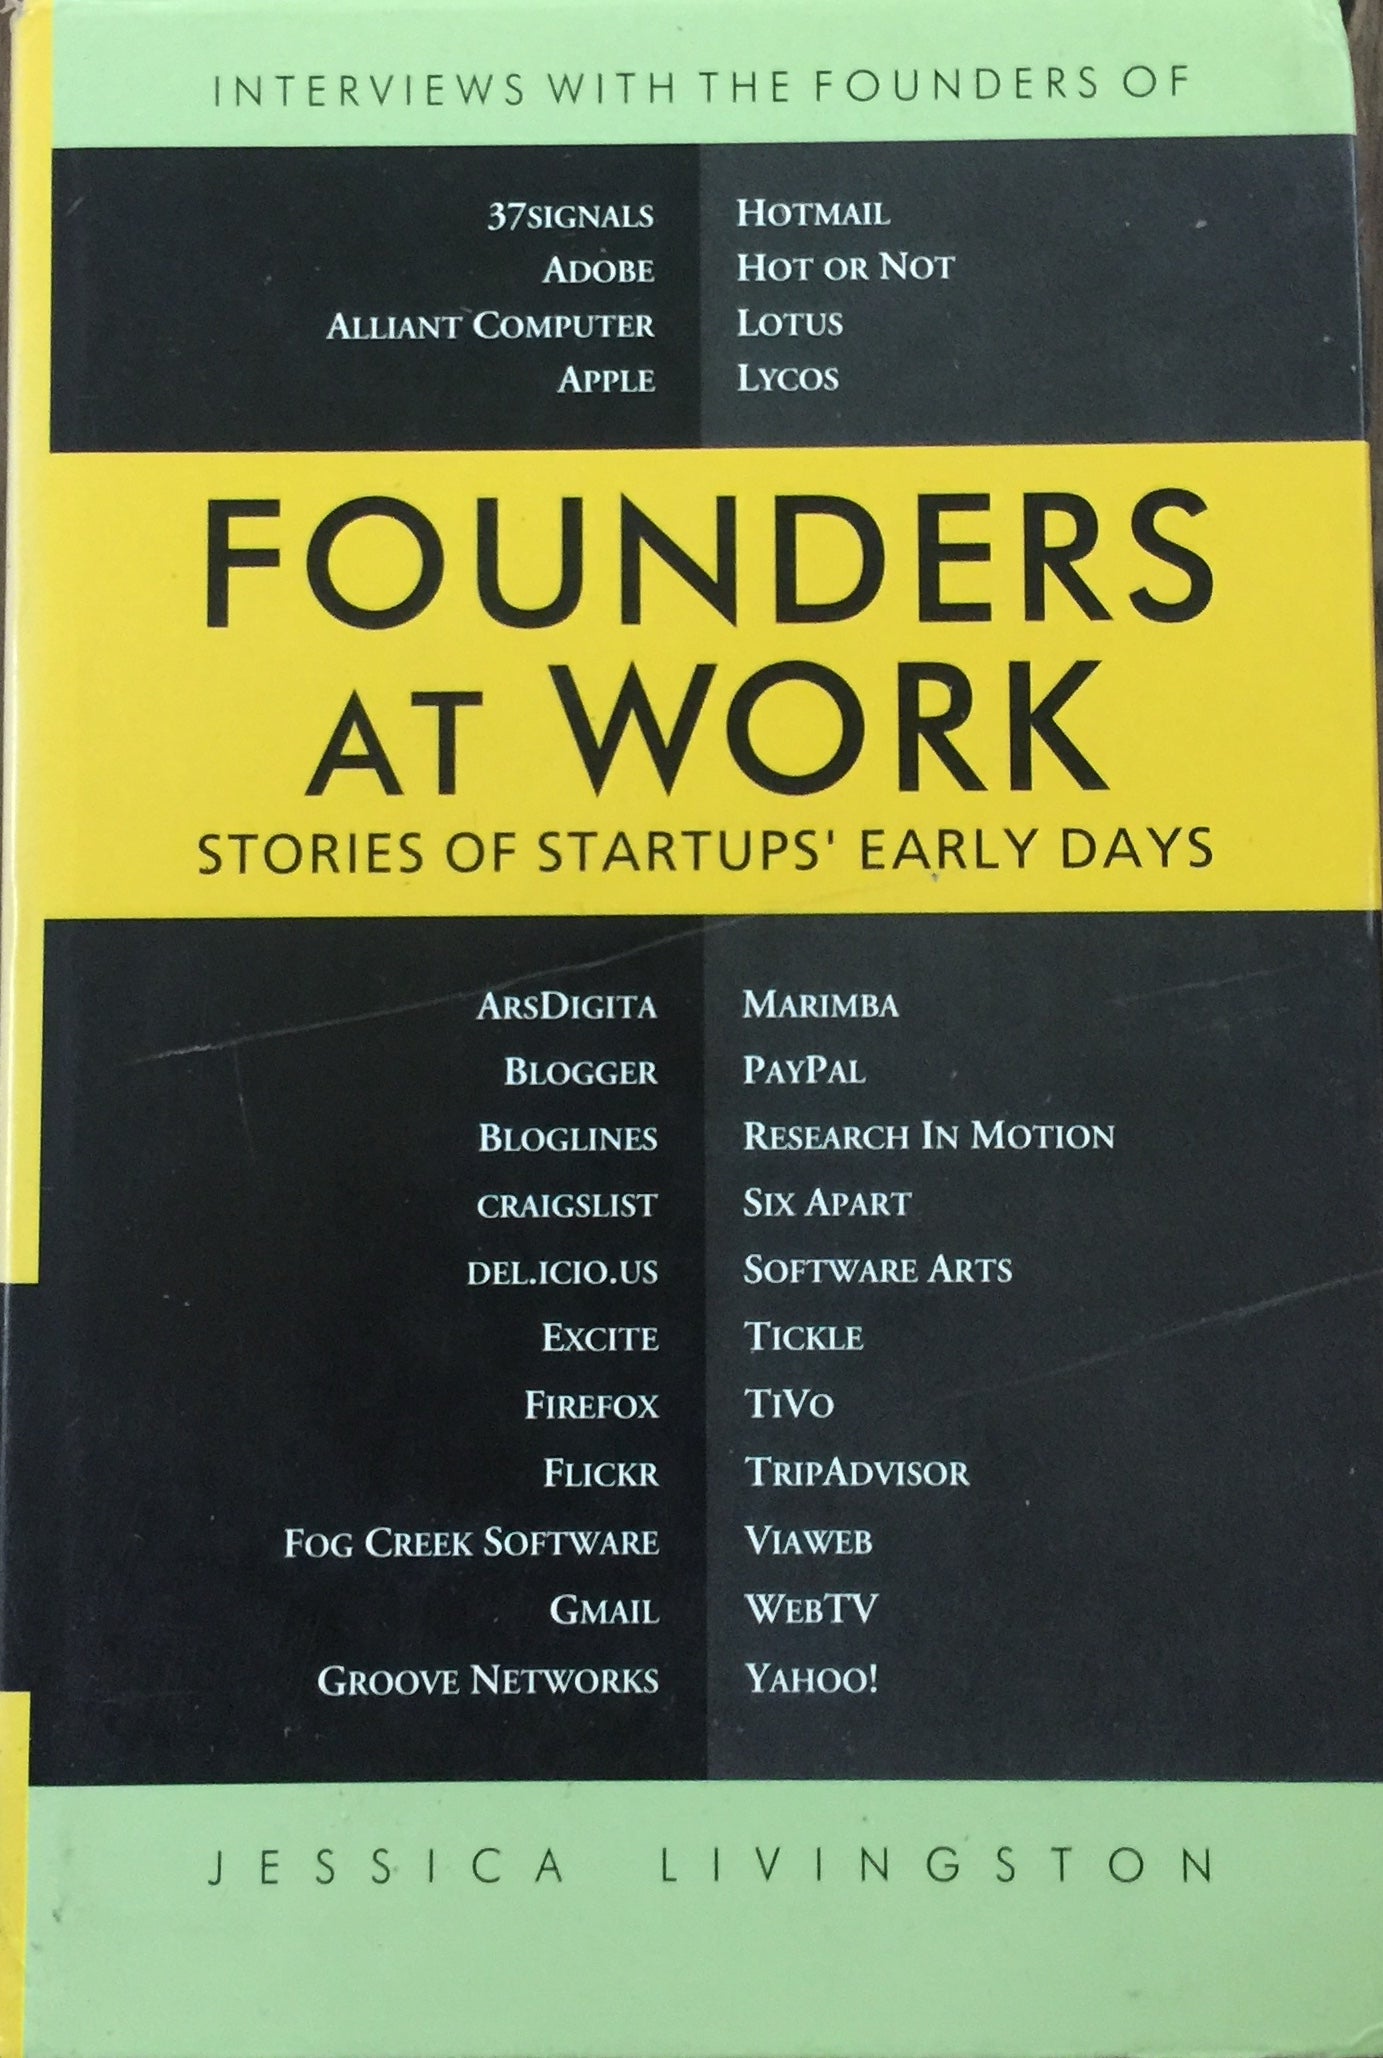 Founders at Work: Stories of Startups' Early Days by Jessica Livingstone  (Hardcover)  Half Price Books India Books inspire-bookspace.myshopify.com Half Price Books India